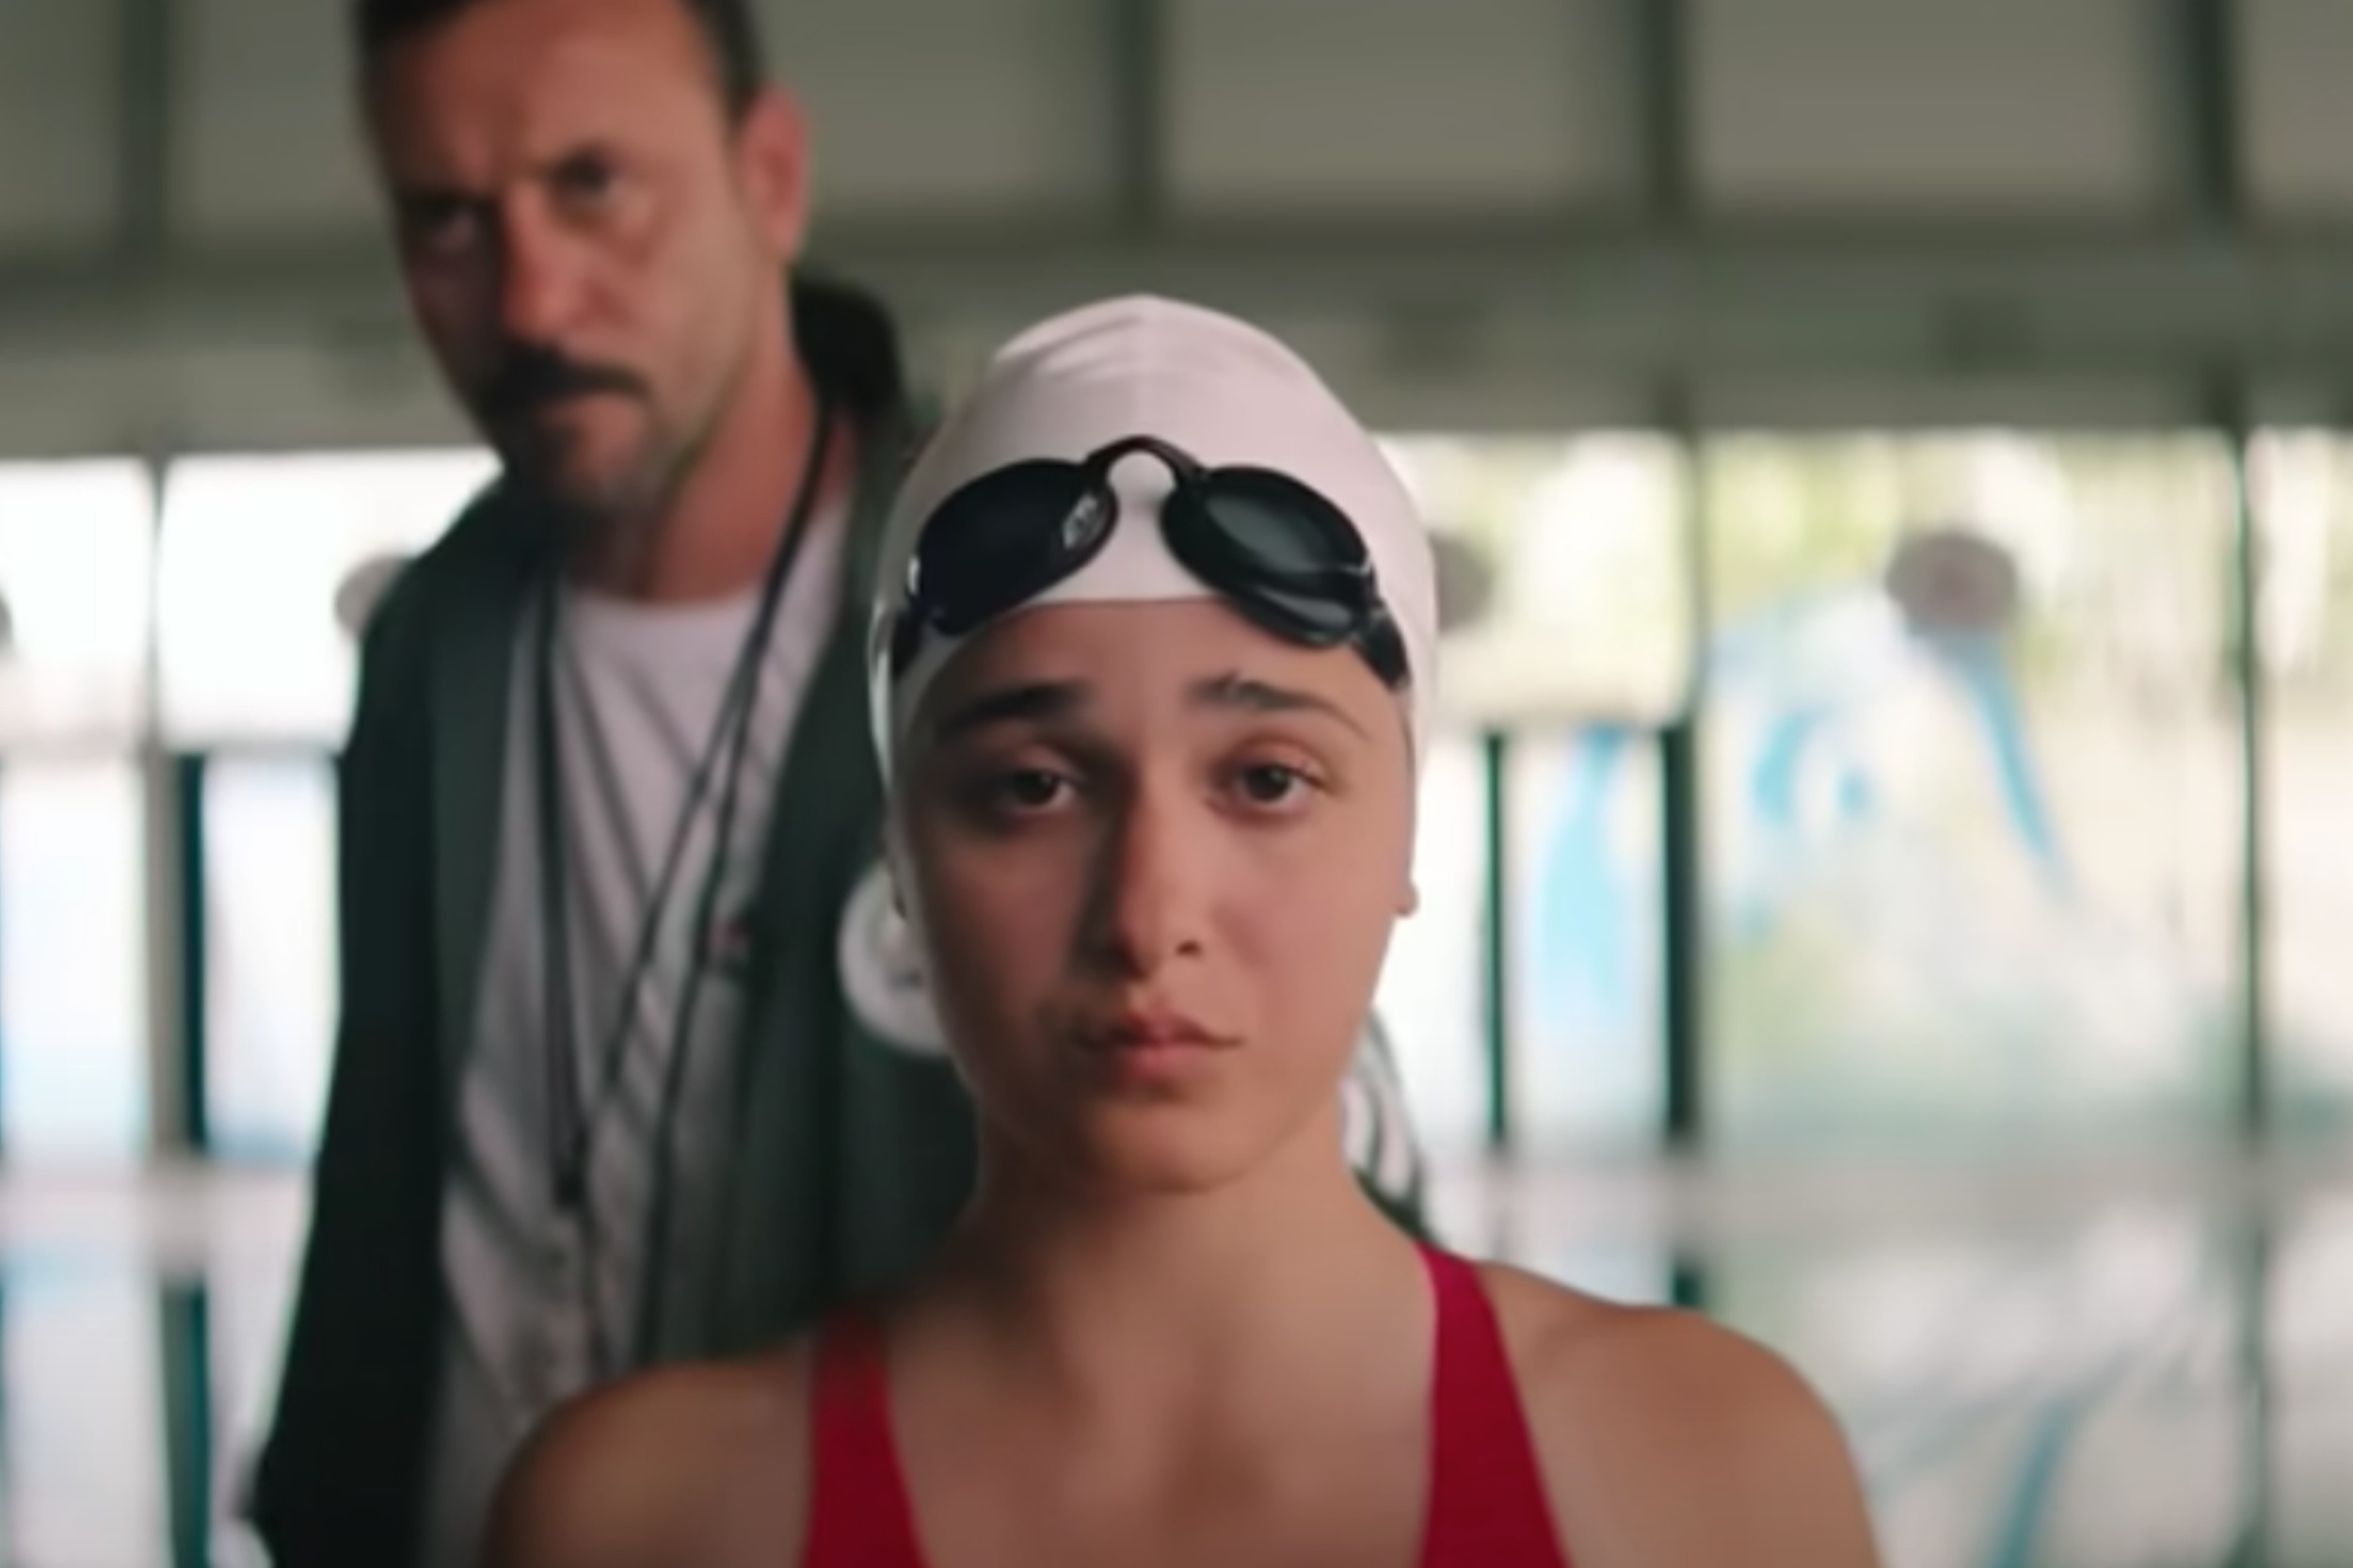 <p><em>The Swimmers</em> tells the extraordinary true story of Yusra and Sarah Mardini, two sisters who flee from war-torn Syria, become refugees, and end up competing at the 2016 Rio Olympics. The film is both inspiring and heartbreaking, with an emphasis on both the determination of the girls and the harrowing journey asylum seekers all around the world are forced to endure. While there is much turmoil along the way, <em>The Swimmers</em> will leave you smiling and believing anything is possible. </p><p><a href='https://www.msn.com/en-us/community/channel/vid-cj9pqbr0vn9in2b6ddcd8sfgpfq6x6utp44fssrv6mc2gtybw0us'>Follow us on MSN to see more of our exclusive entertainment content.</a></p>